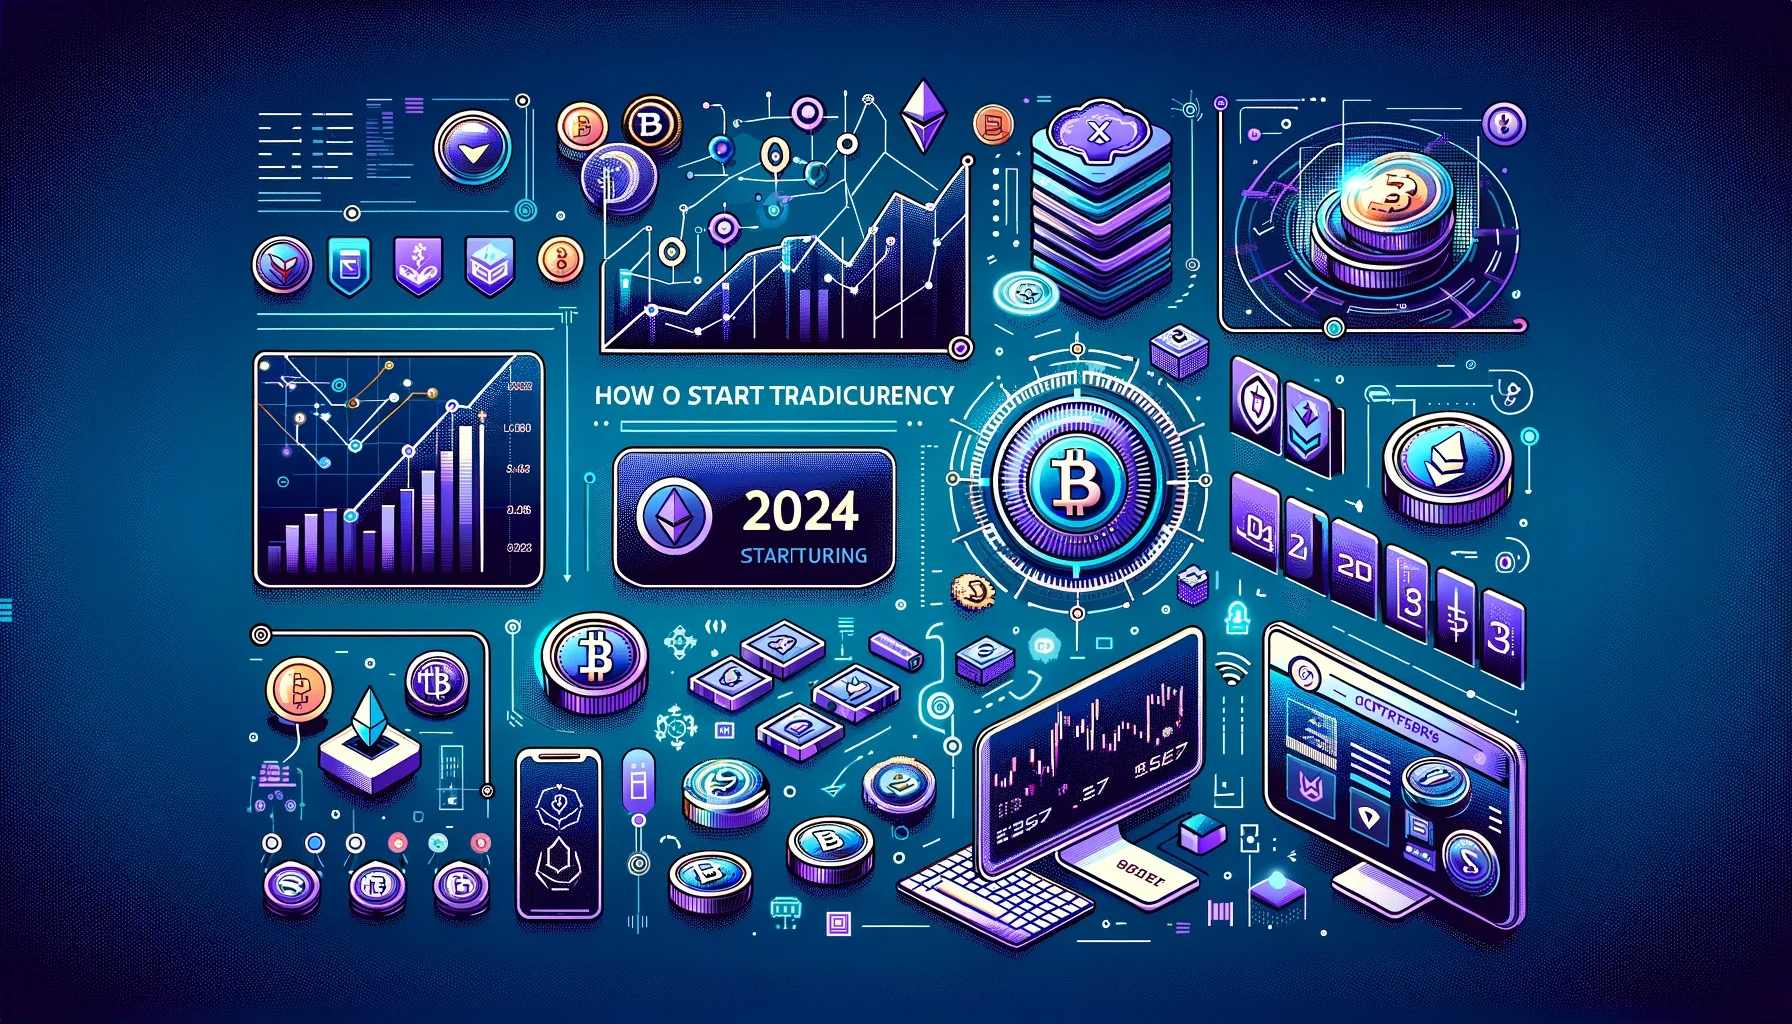 How to Start Trading Cryptocurrency in 2024 LTU